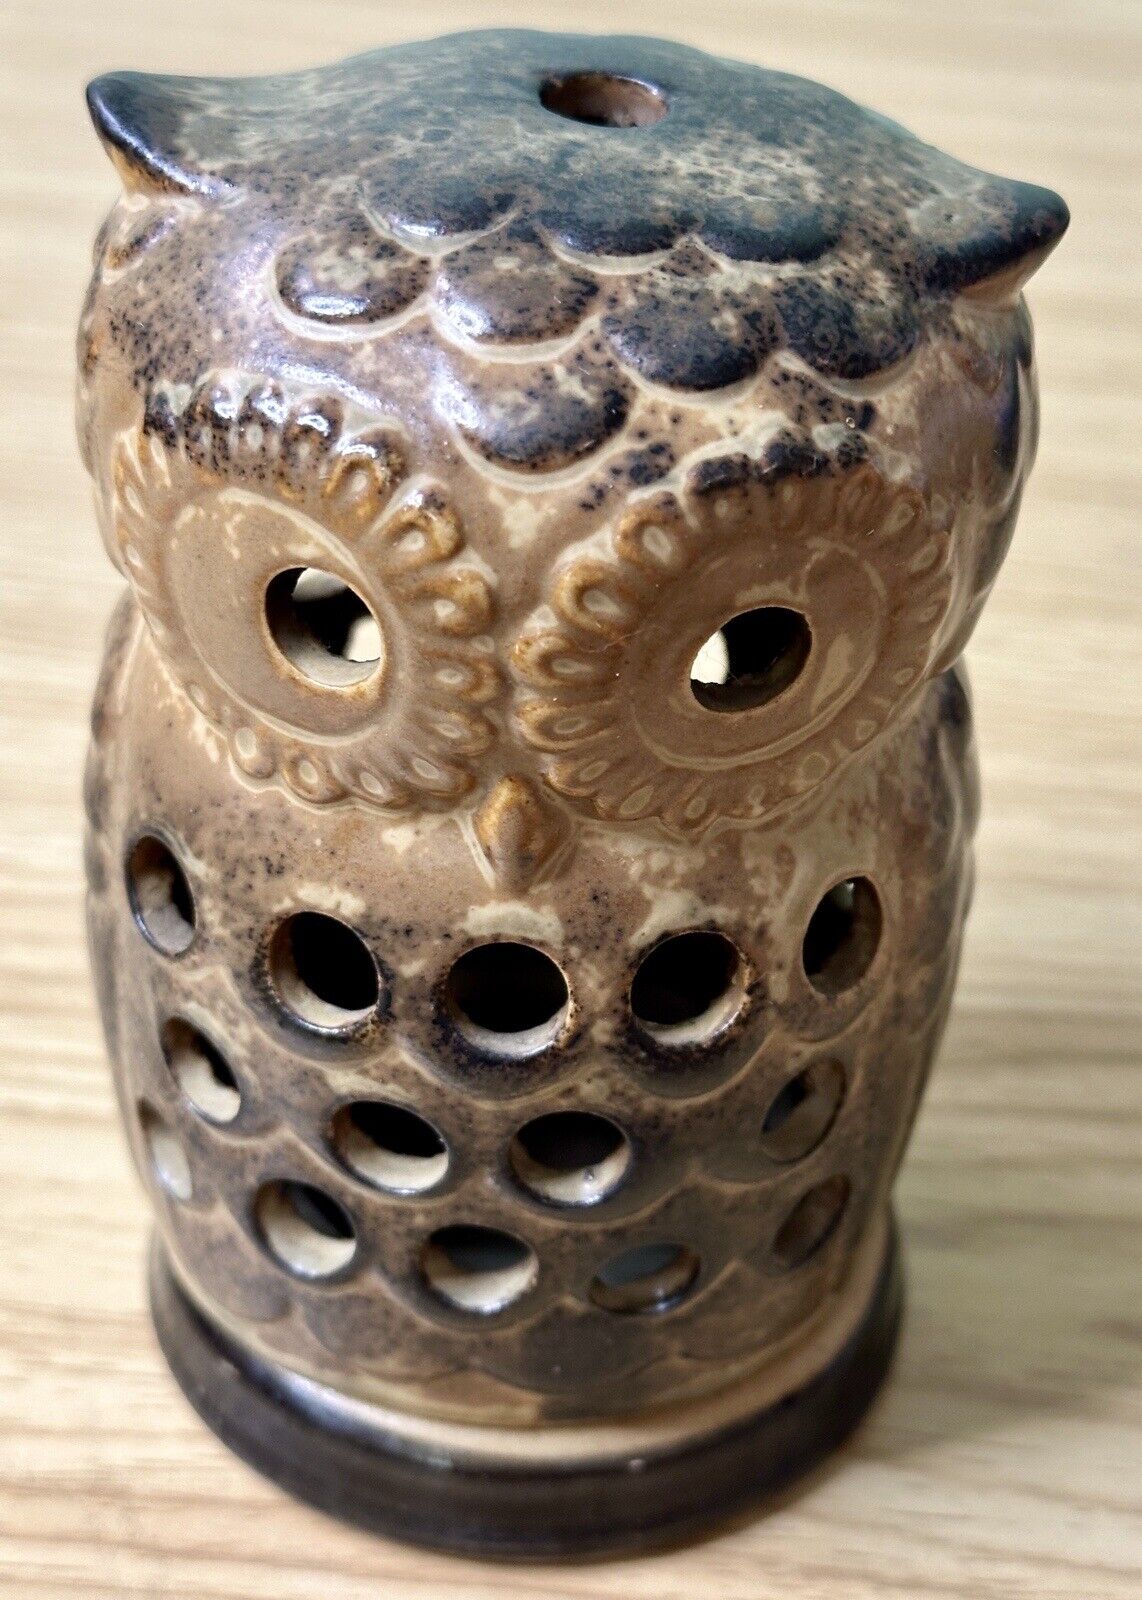 Vintage Ceramic Woodland Owl Tealight Candle Holder in Earth Tones - 5” Tall